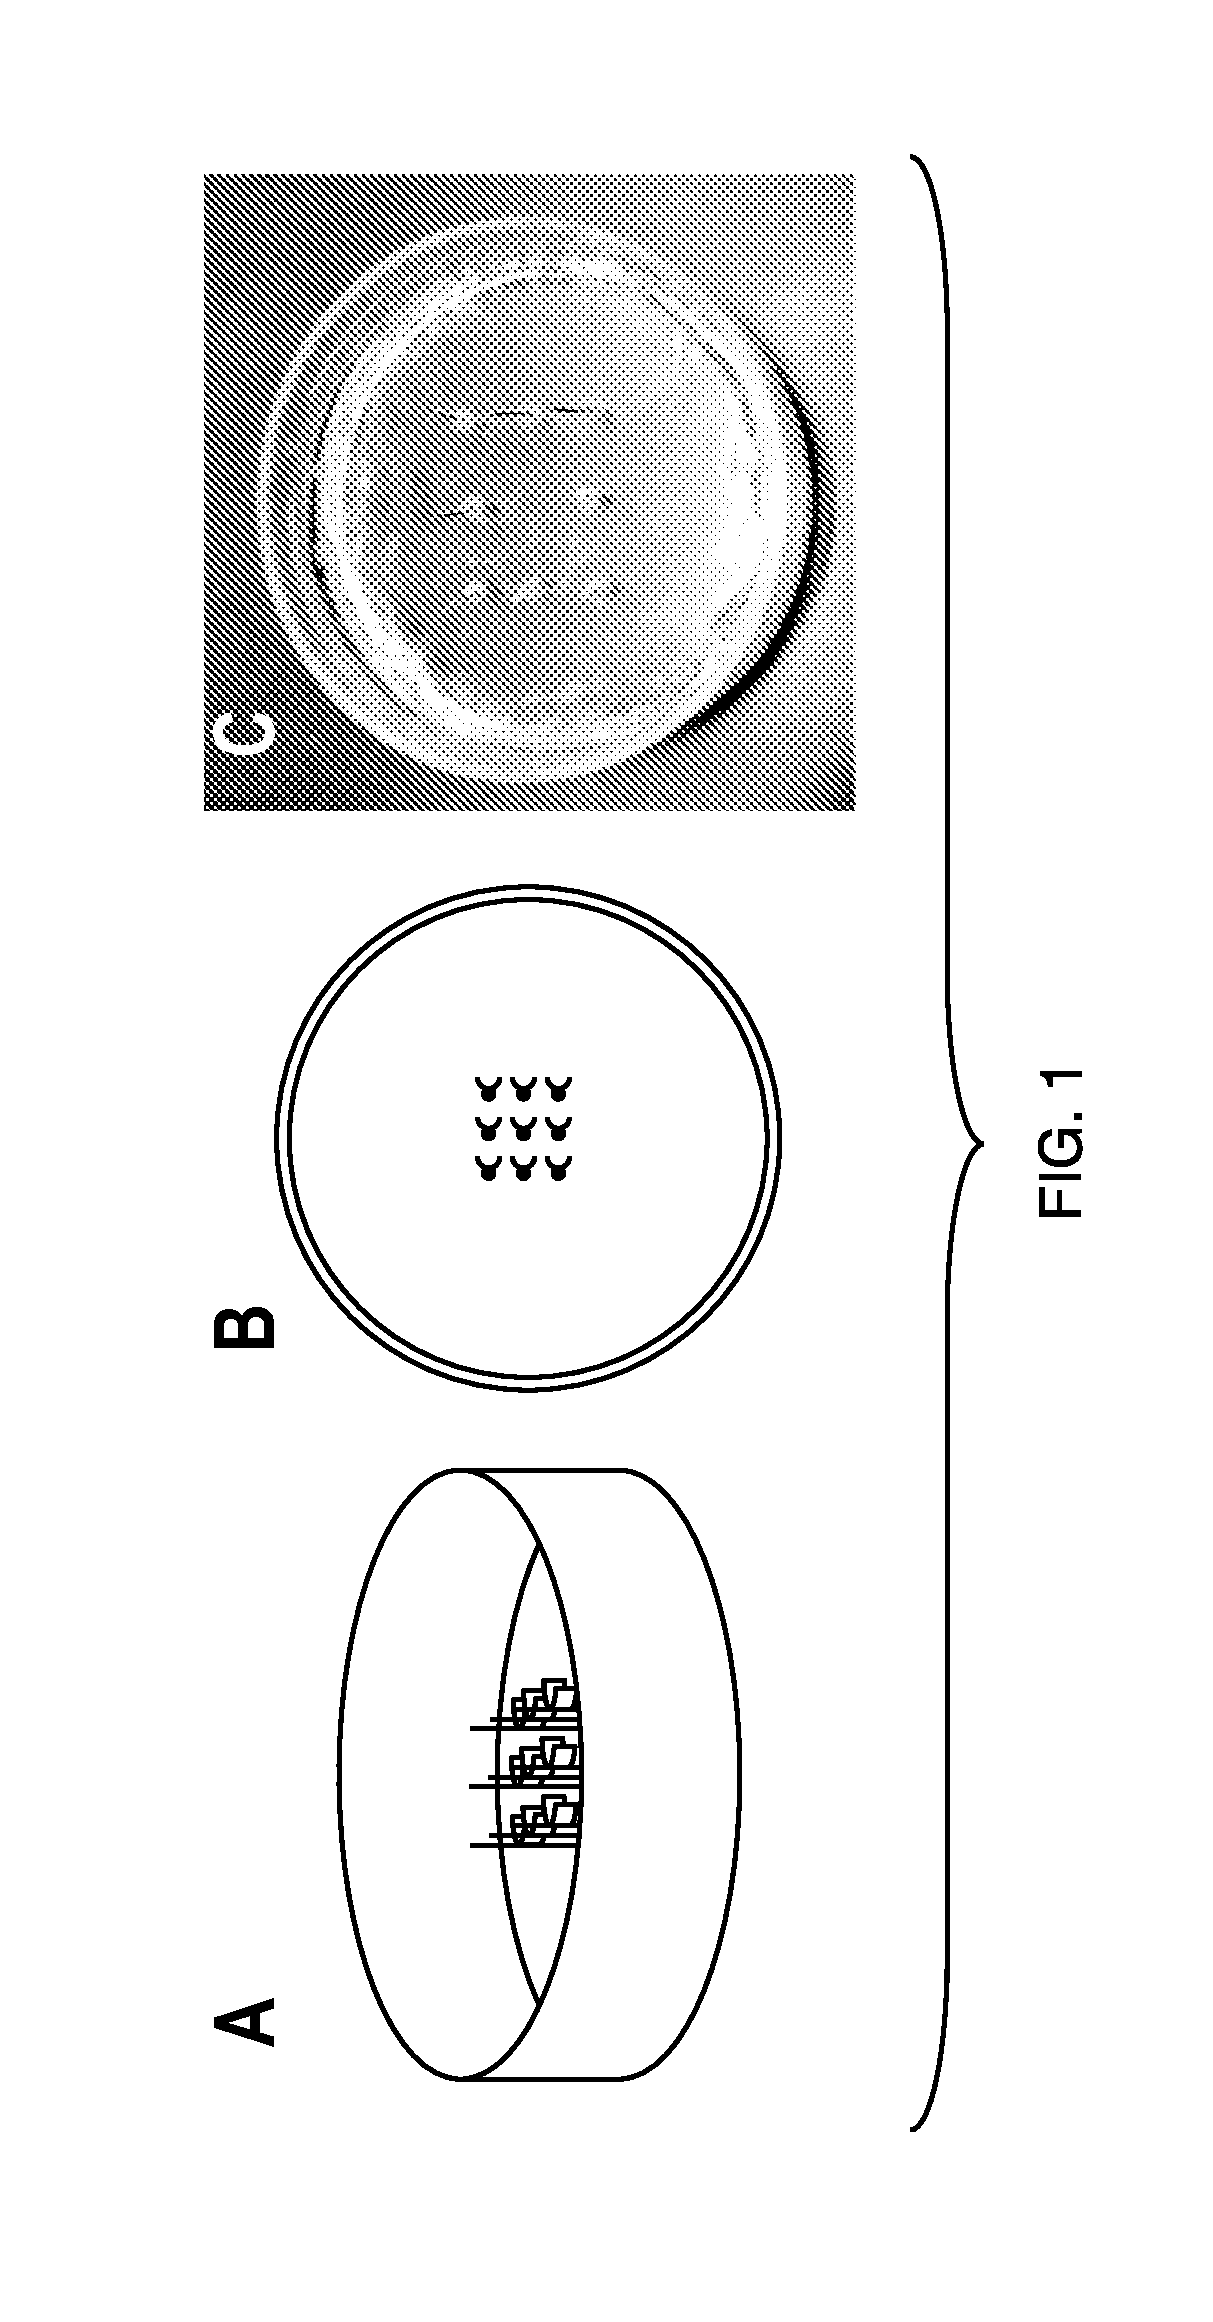 Muscle chips and methods of use thereof